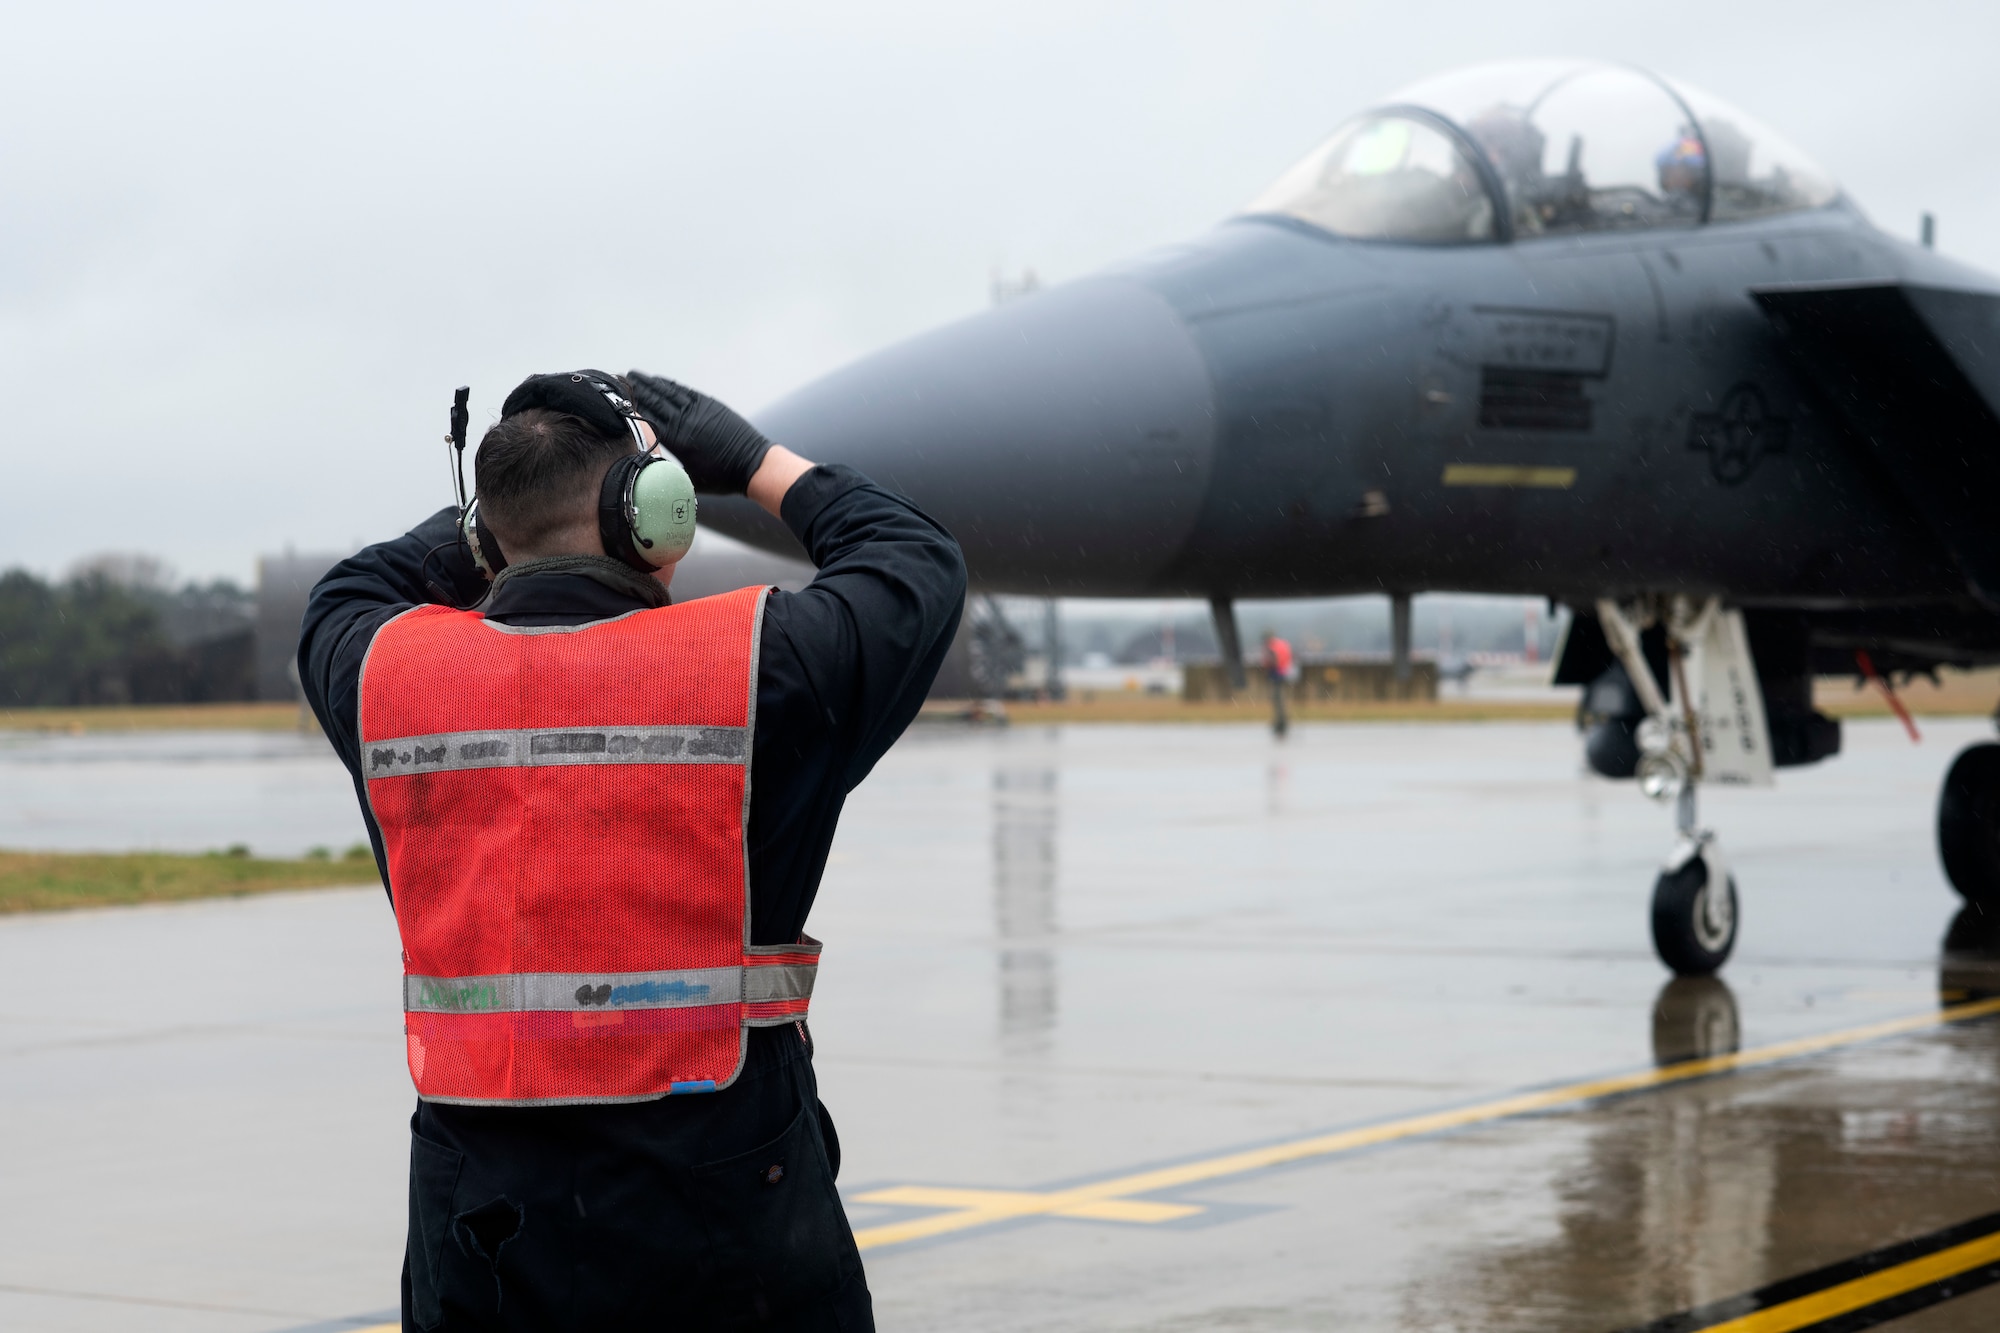 A crew chief assigned to the 492nd Aircraft Maintenance Unit marshals an F-15E Strike Eagle at Royal Air Force Lakenheath, England, May 8, 2019.The 492nd AMU Airmen maintain the world's premier multi-role fighter, the F-15E Strike Eagle to ensure RAF Lakenheath remains combat-ready. (U.S. Air Force photo by Senior Airman Malcolm Mayfield)